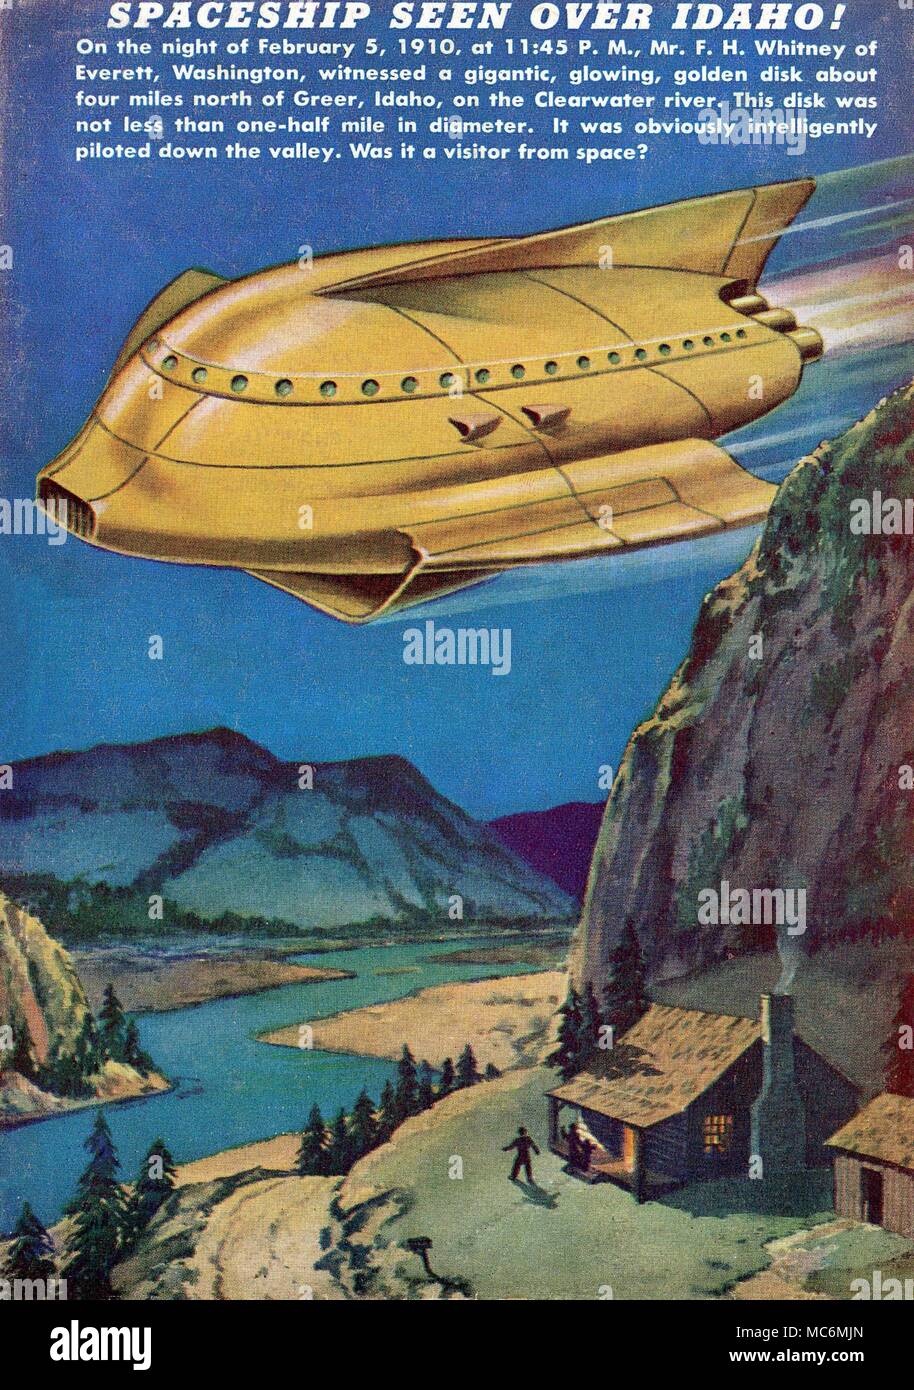 UFOS - SPACESHIP OVER IDAHO Artwork by James Settles, of UFO Spaceship, seen over Idaho, on 5 February 1910, by F.H Whitney of Everett, Washington. Whitney witnessed a gigantic, glowing golden disk, about four miles north of Greer, on the Clearwater river. The disk was not less than one-half a mile in diameter. From back cover of Amazing Stories, Vol. 22, No. 1, January 1948. Stock Photo